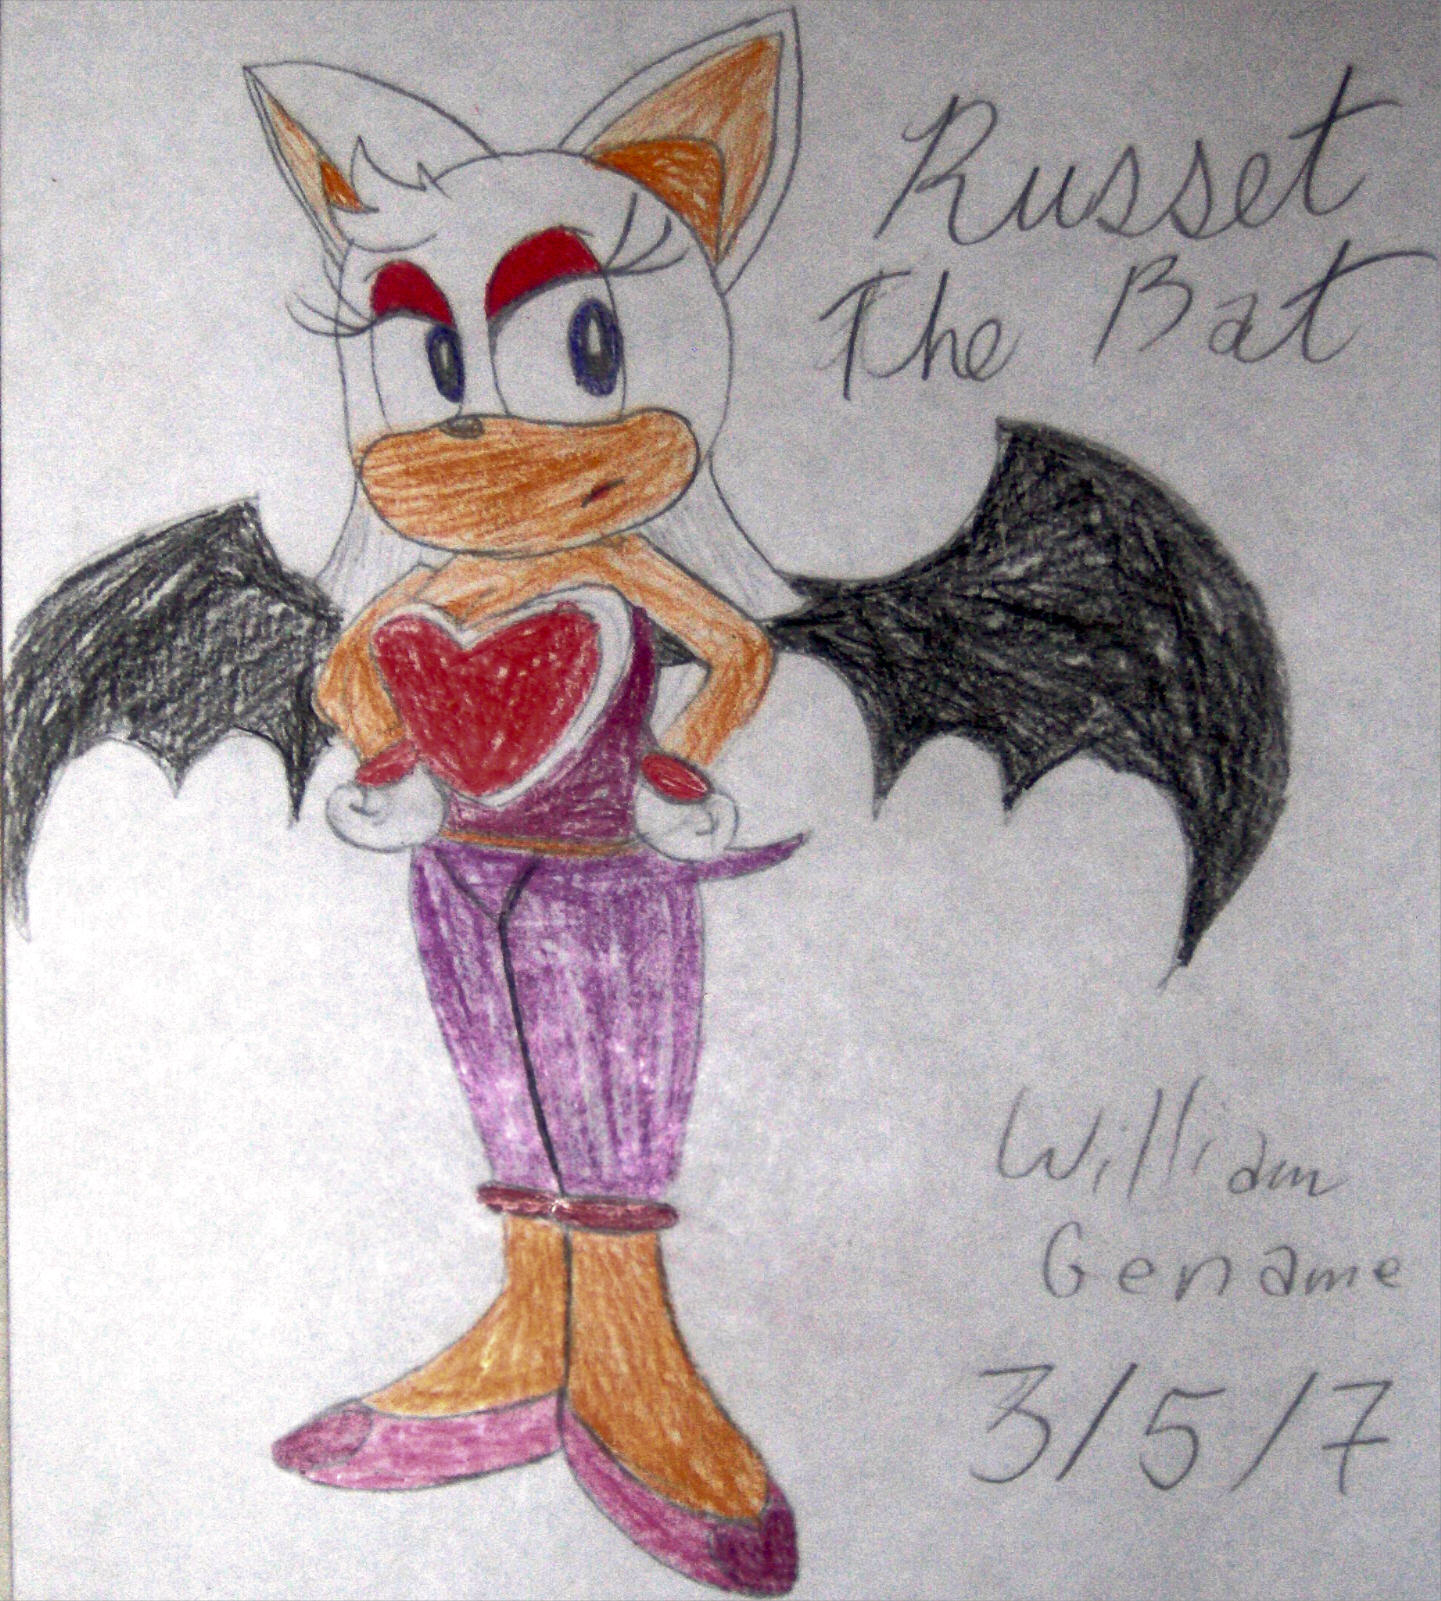 Russet the Bat by germanname